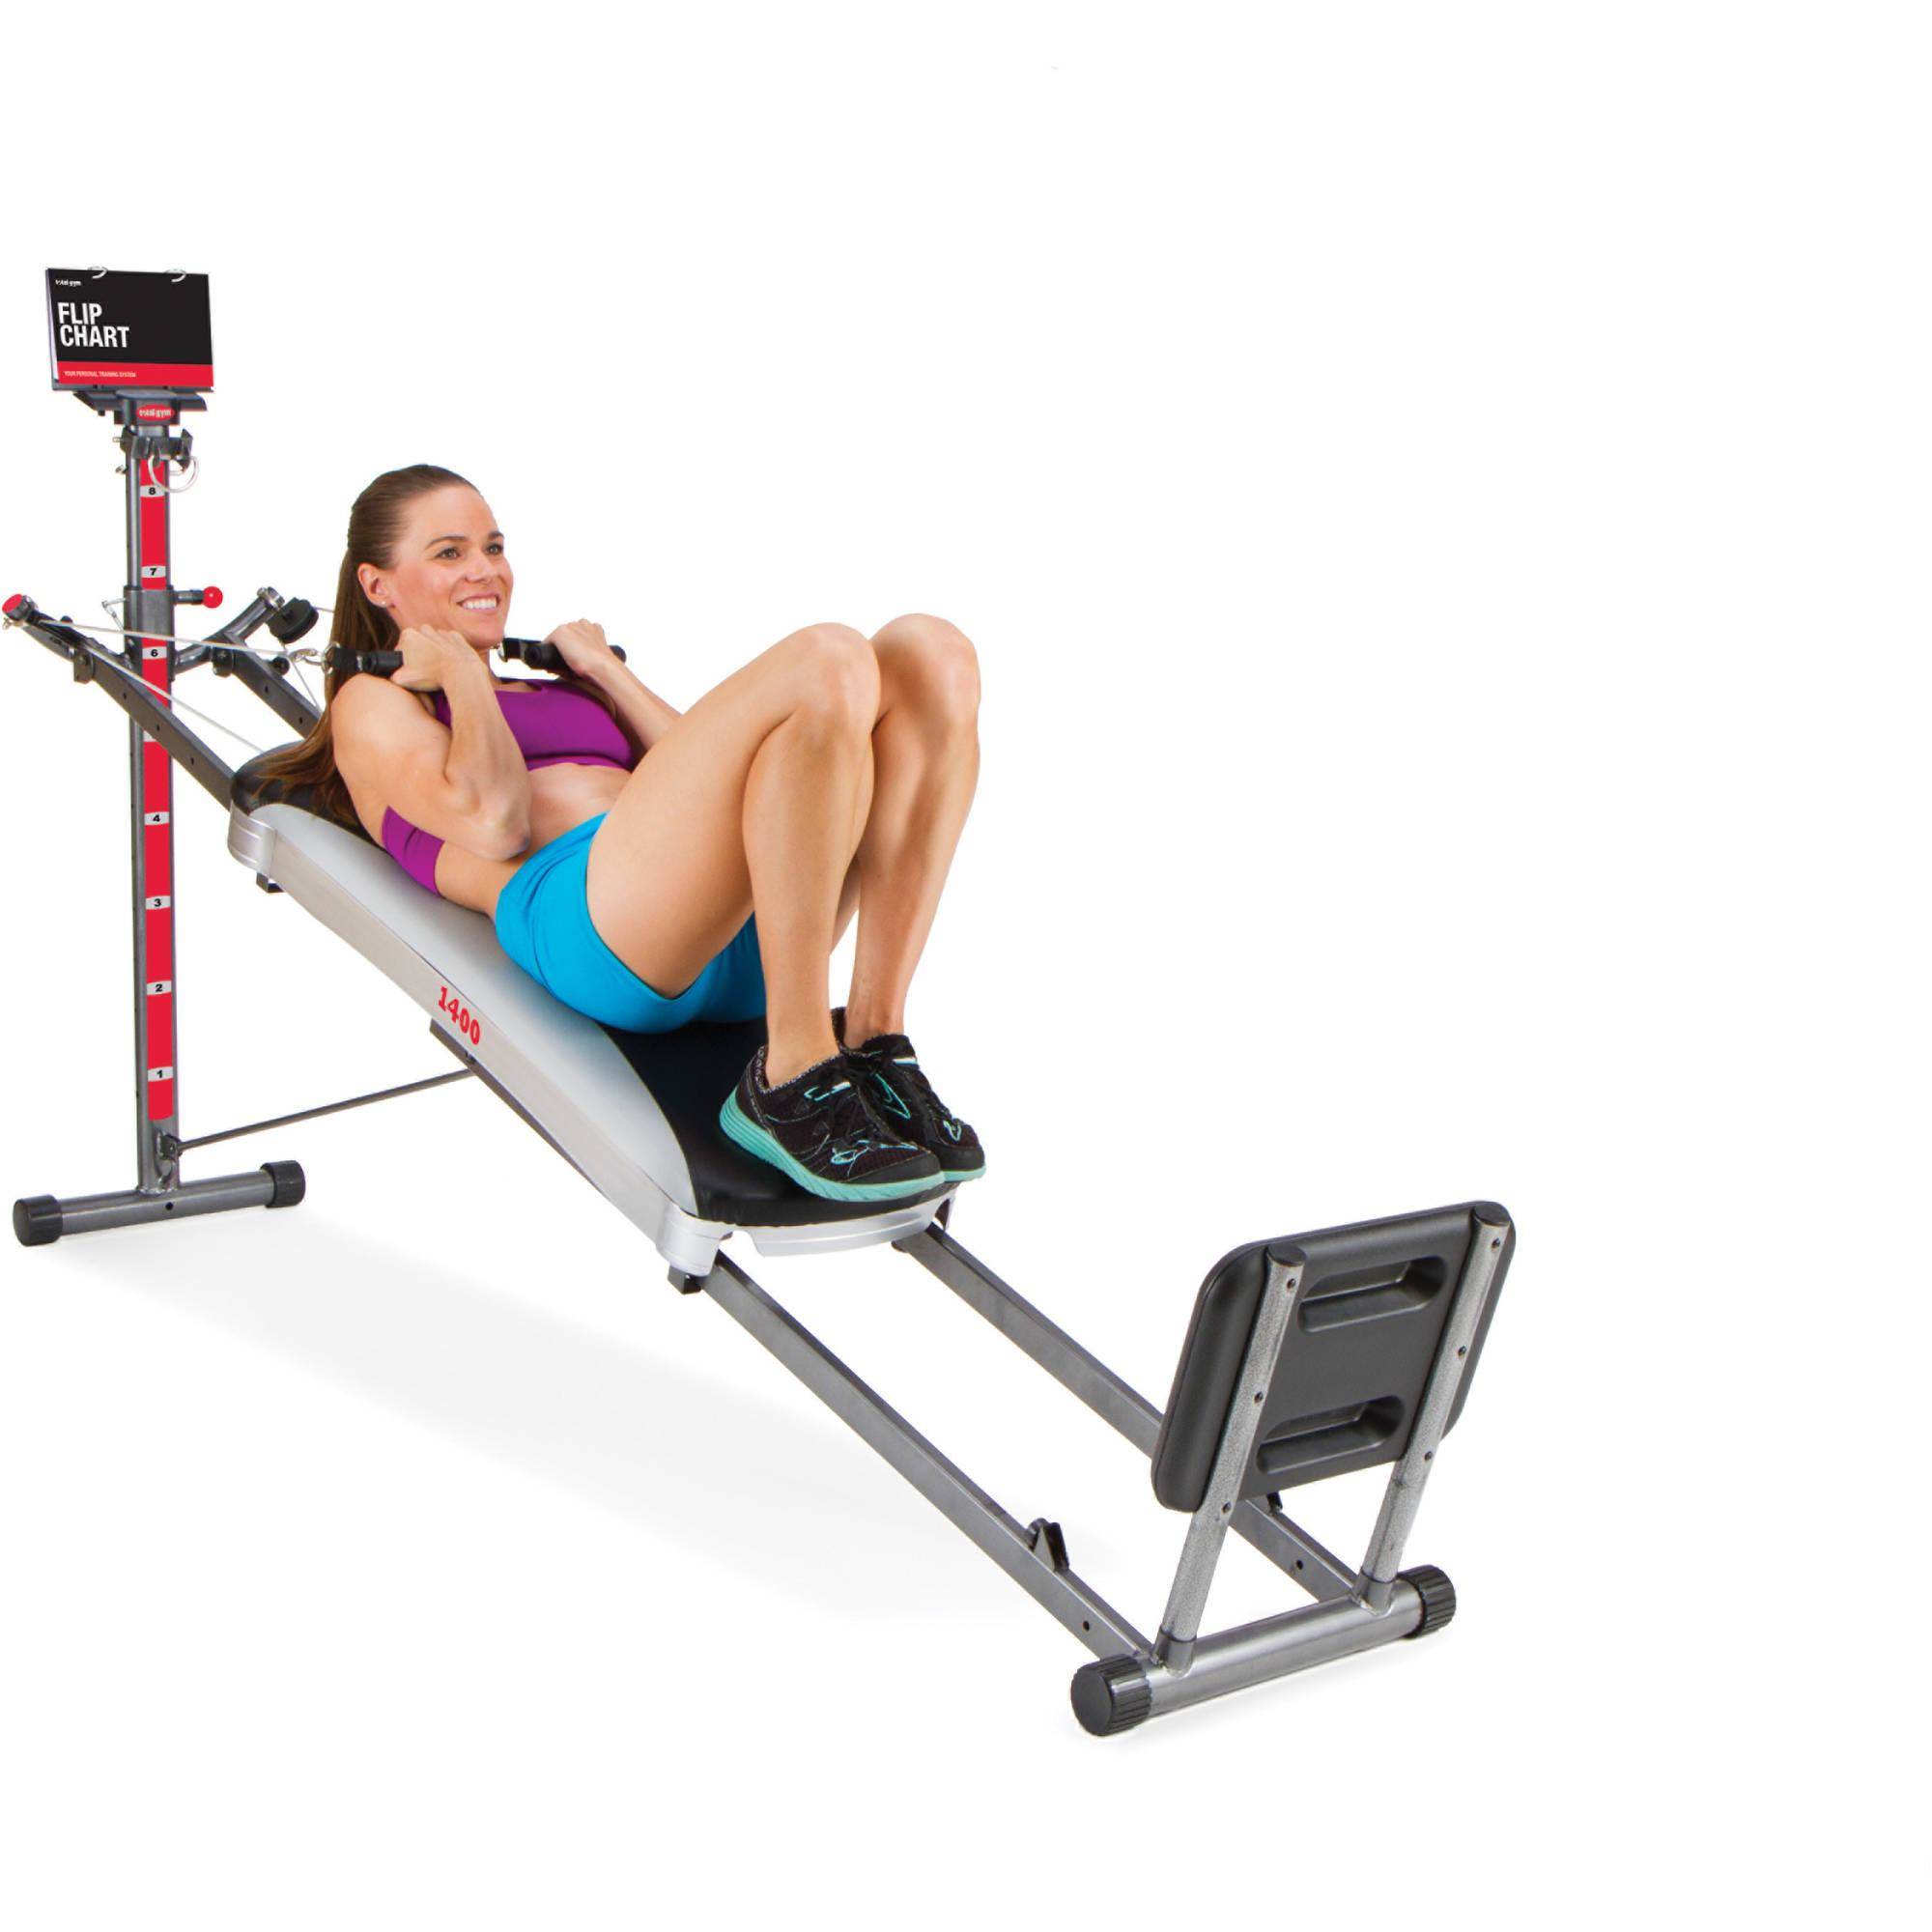 Total Gym 1400 Deluxe Home Fitness Exercise Machine Equipment with Workout DVD - image 5 of 15